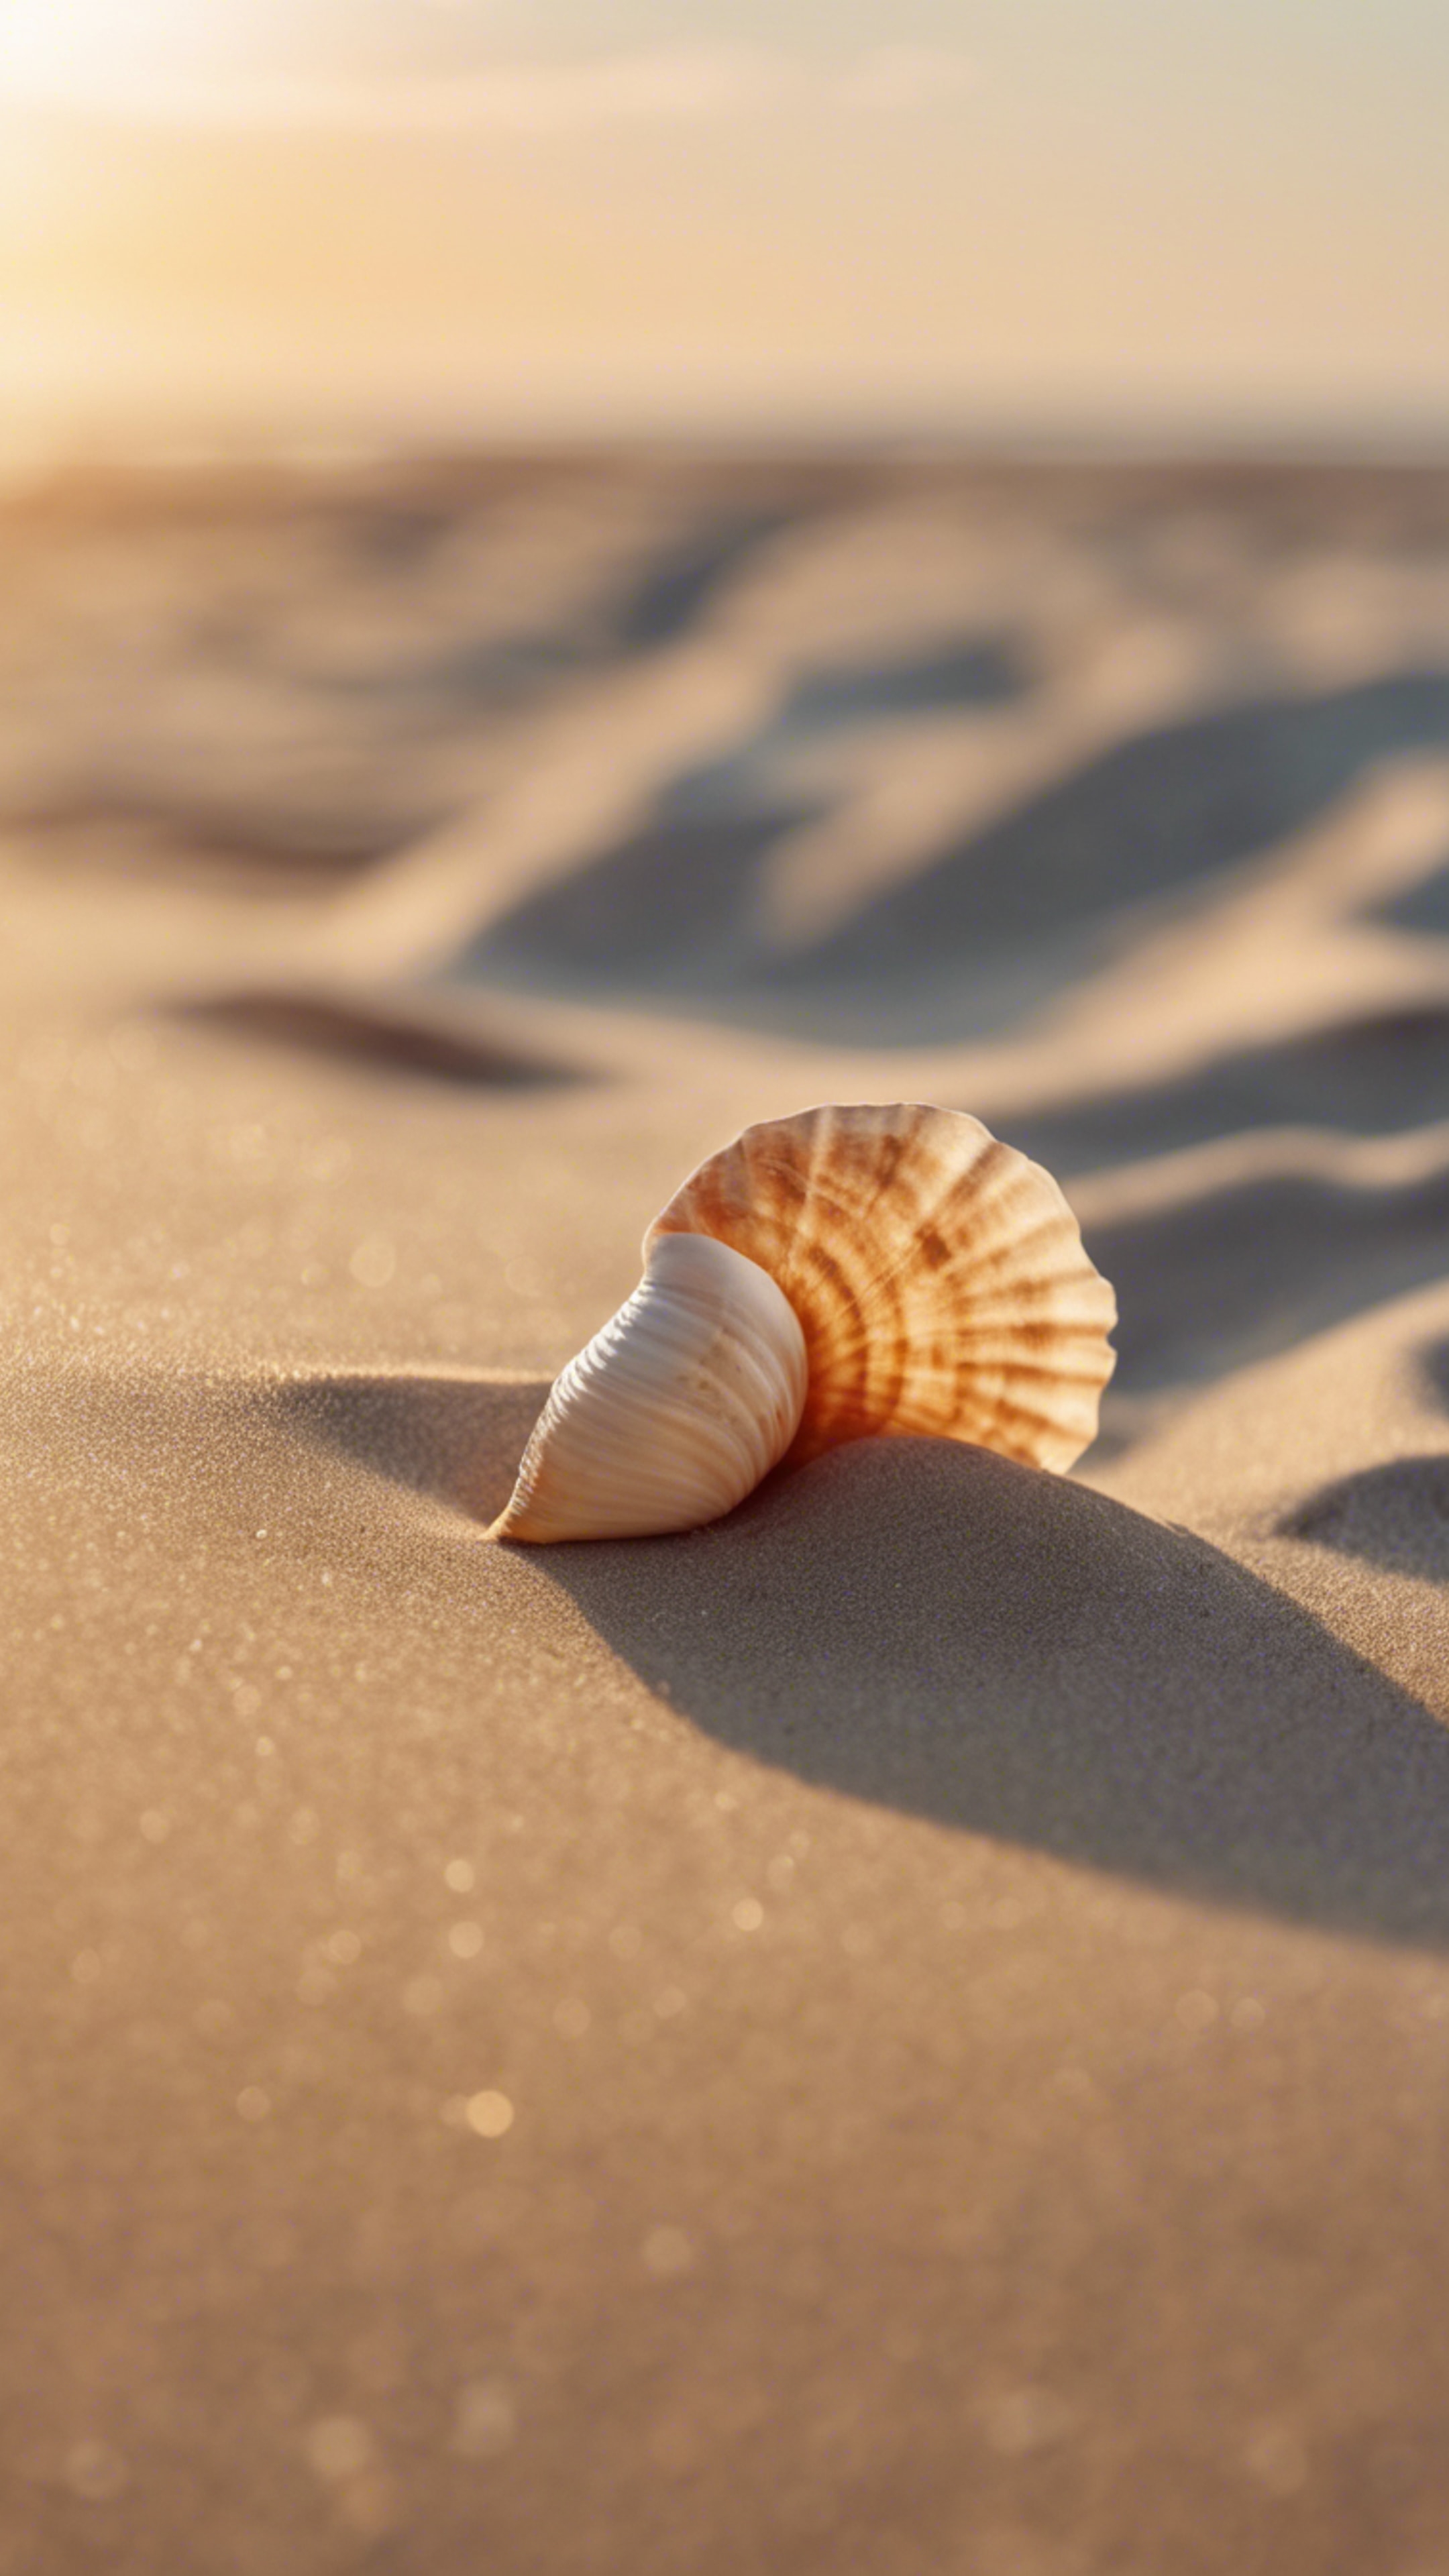 A sandy beach at sunrise, with a lonely seashell on the smooth, cool beige sand. Tapeta[f397365f3b8642f18a02]